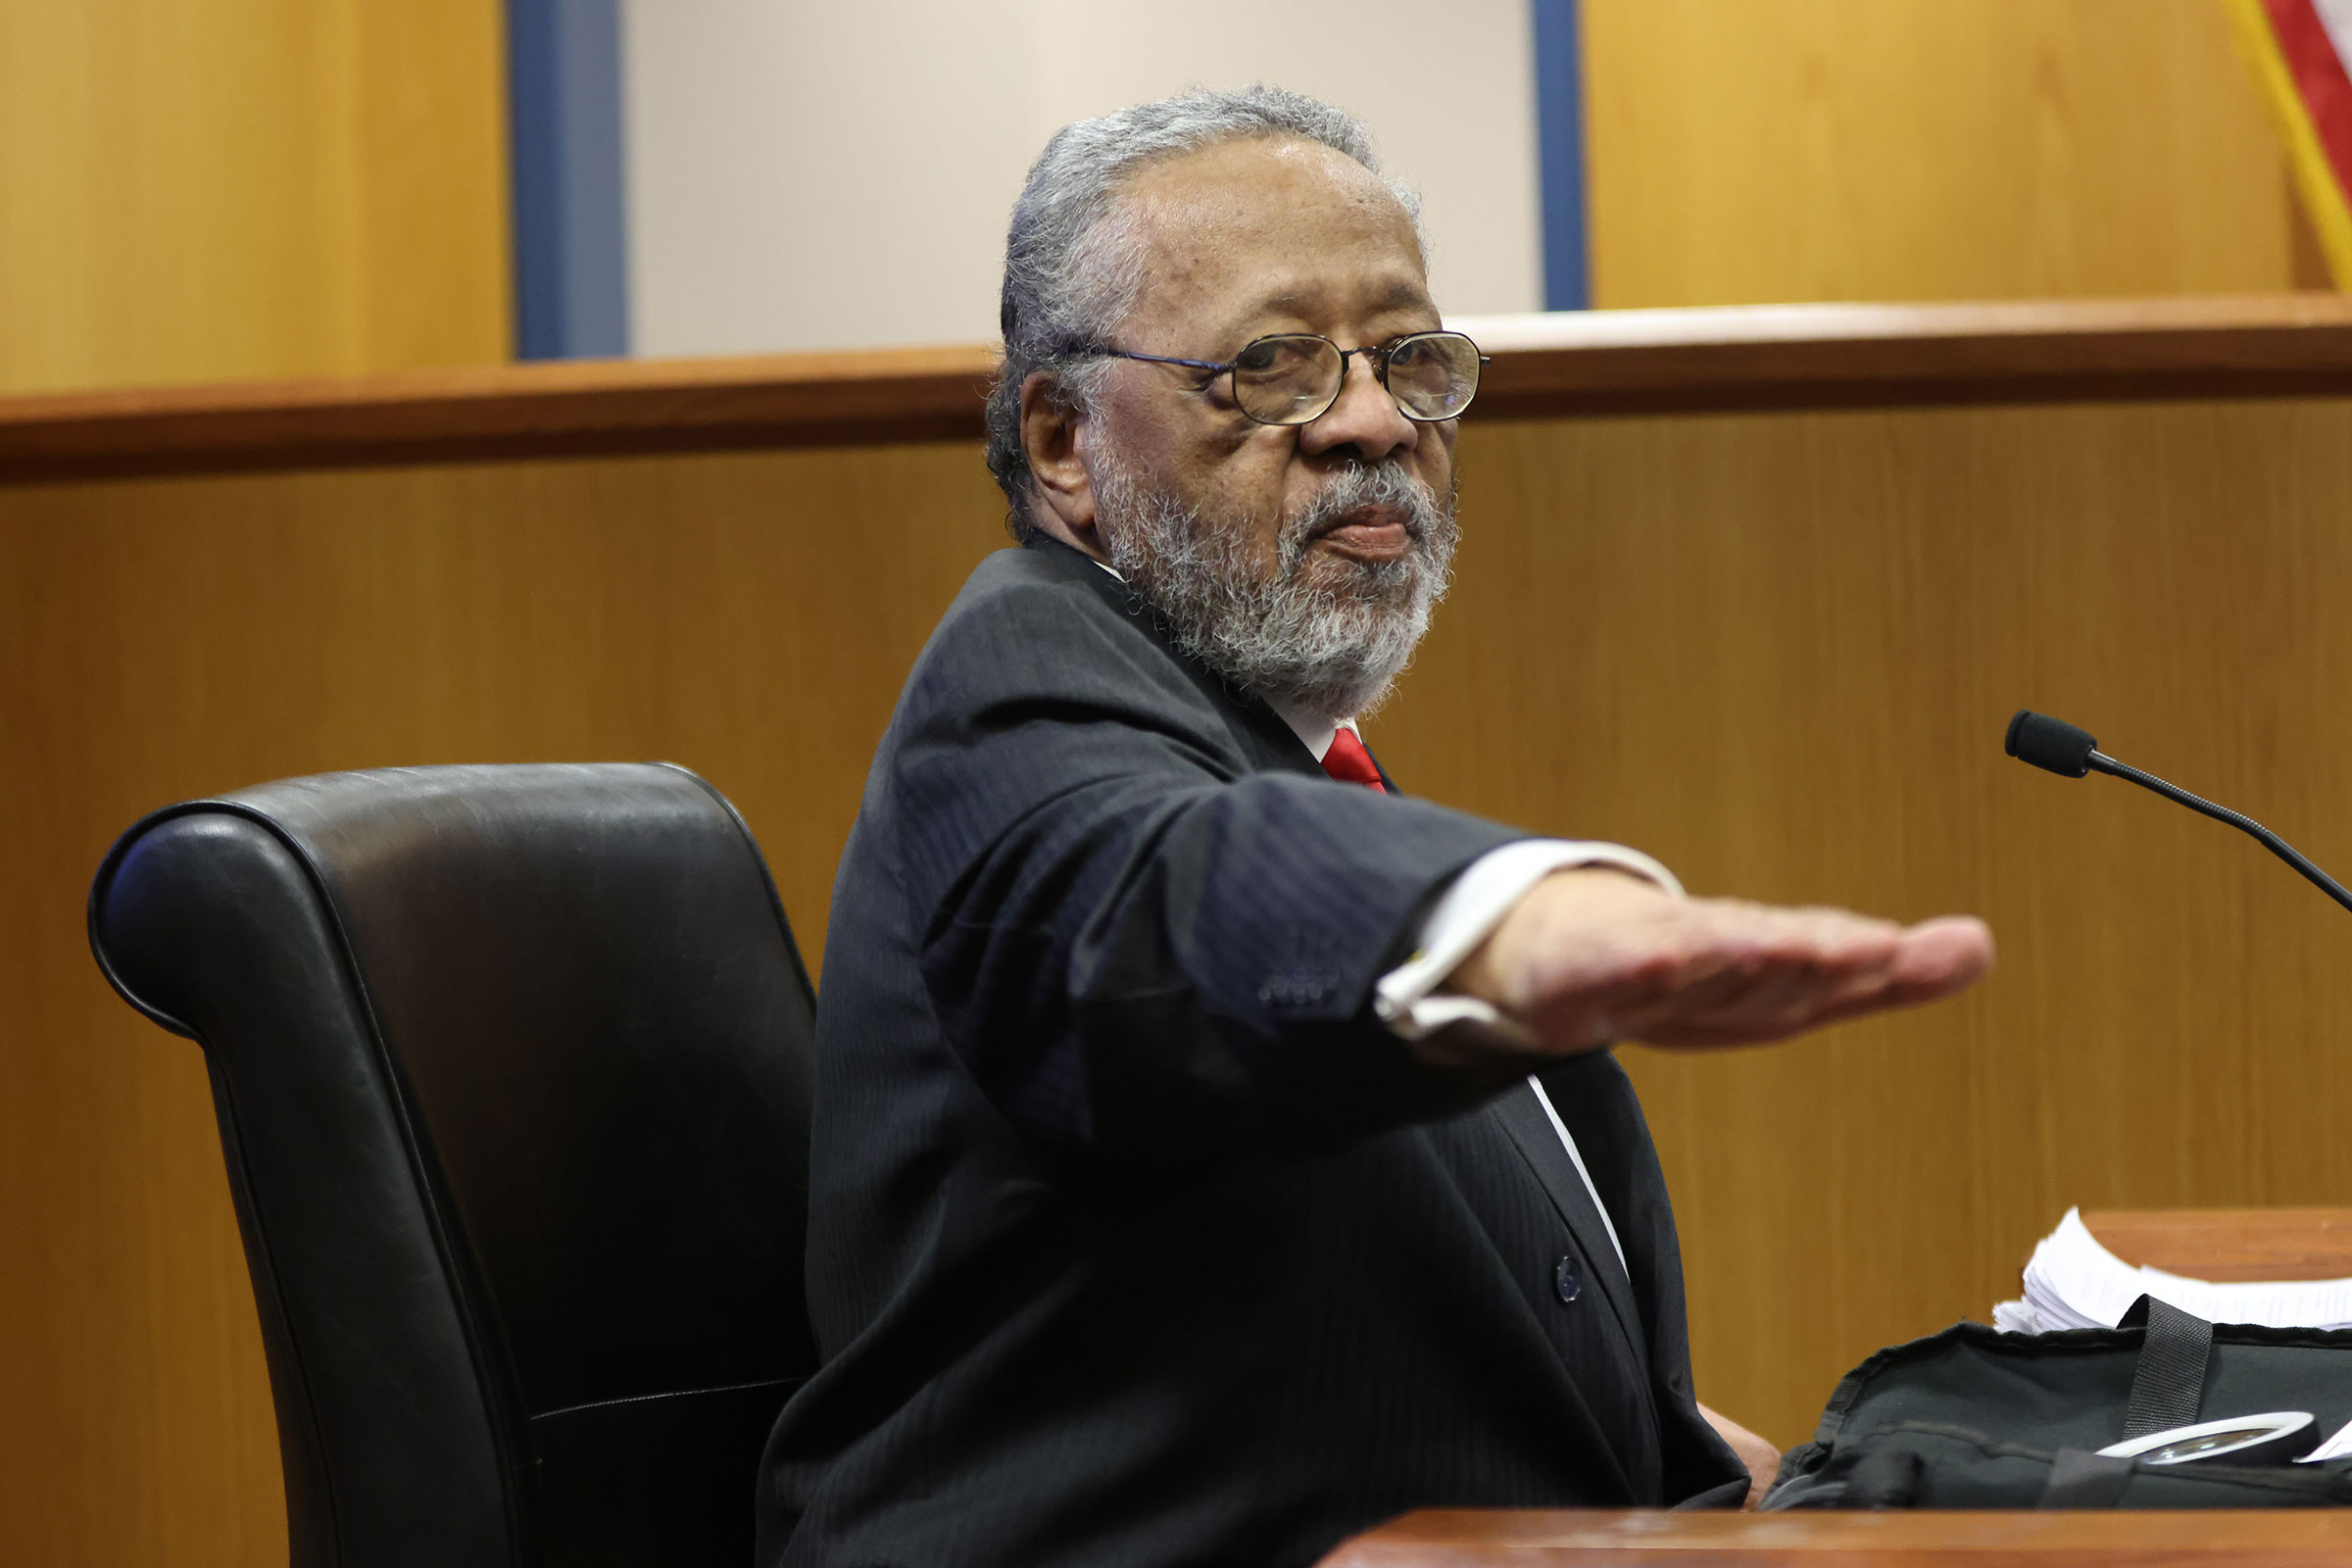 John Floyd gestures from the witness stand during a hearing in the case of the State of Georgia v. Donald John Trump at the Fulton County Courthouse on February 16, in Atlanta. 